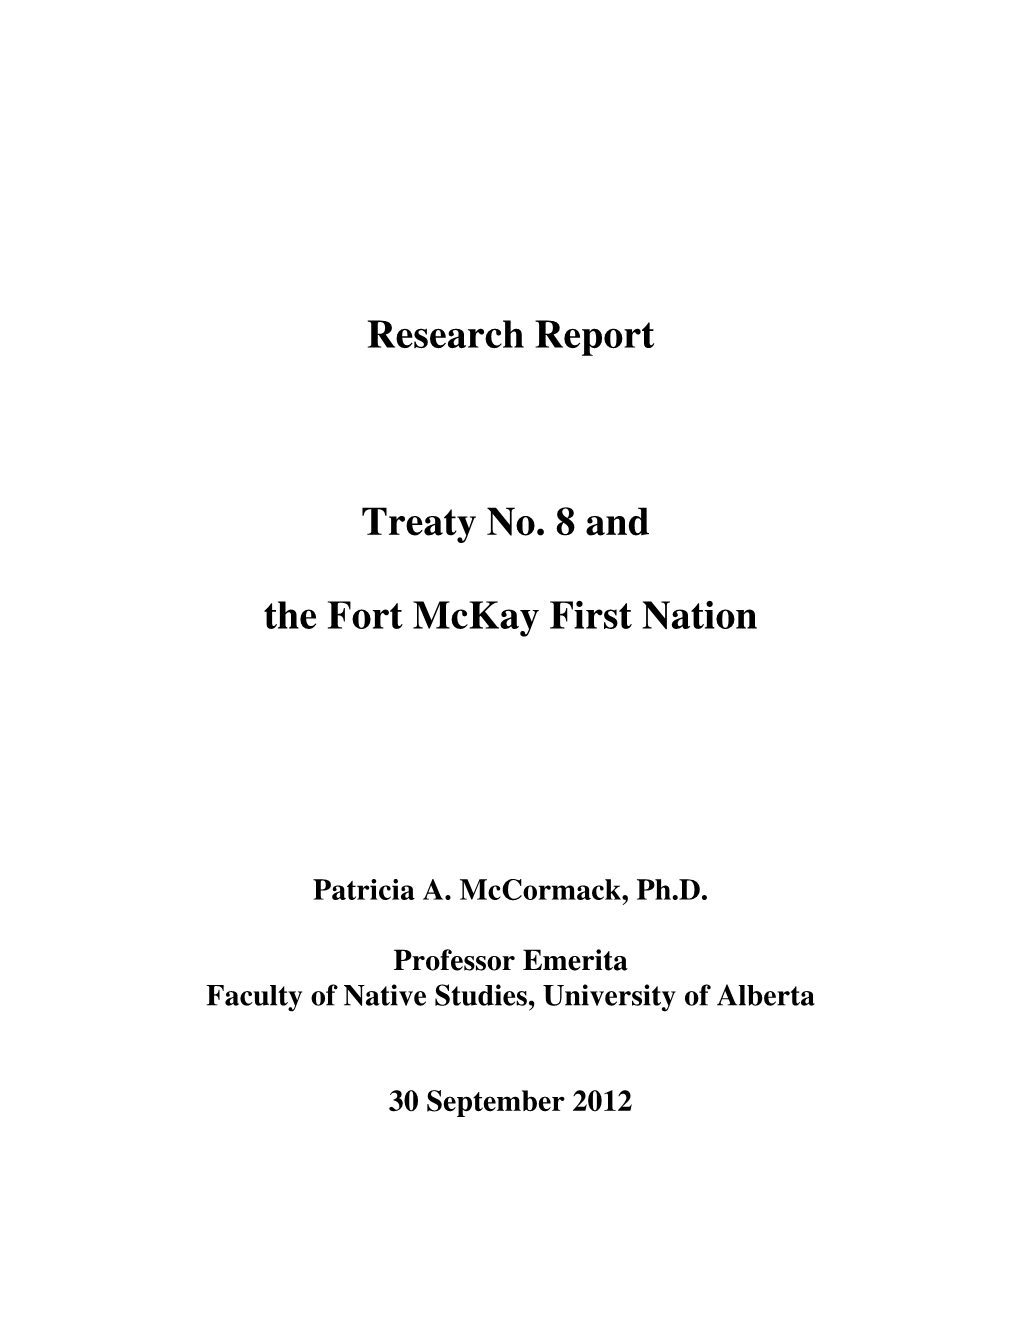 C:\Users\Patricia\Documents\Fort Mckay FN\Cover & Table of Contents